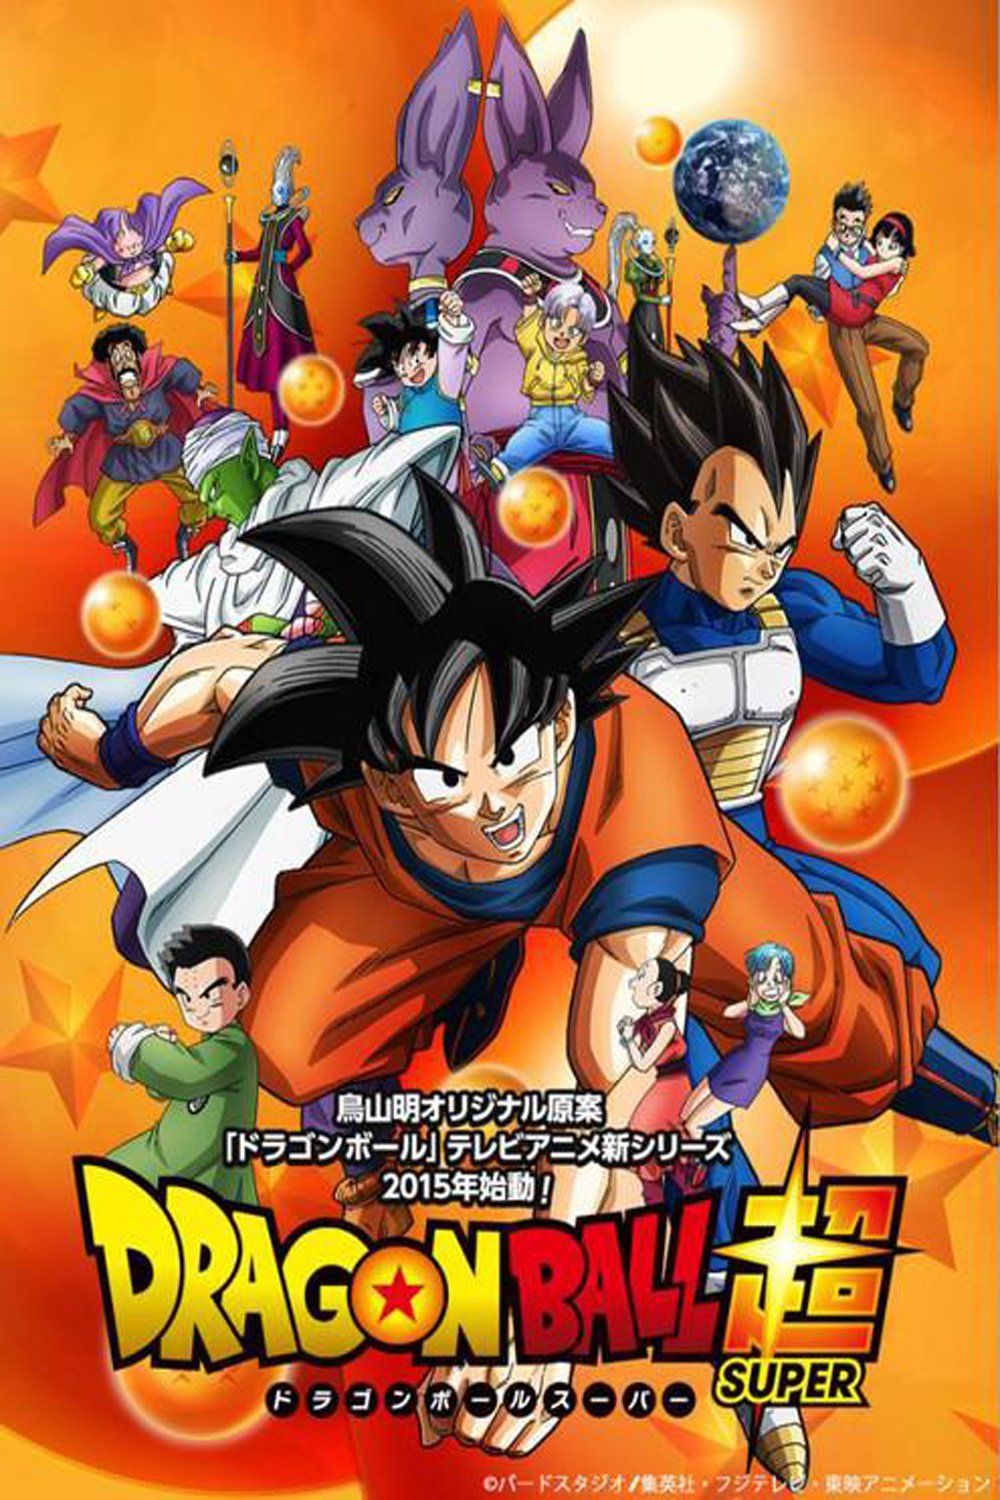 How to Watch 'Dragon Ball Super: Super Hero': Buy It to Stream Online